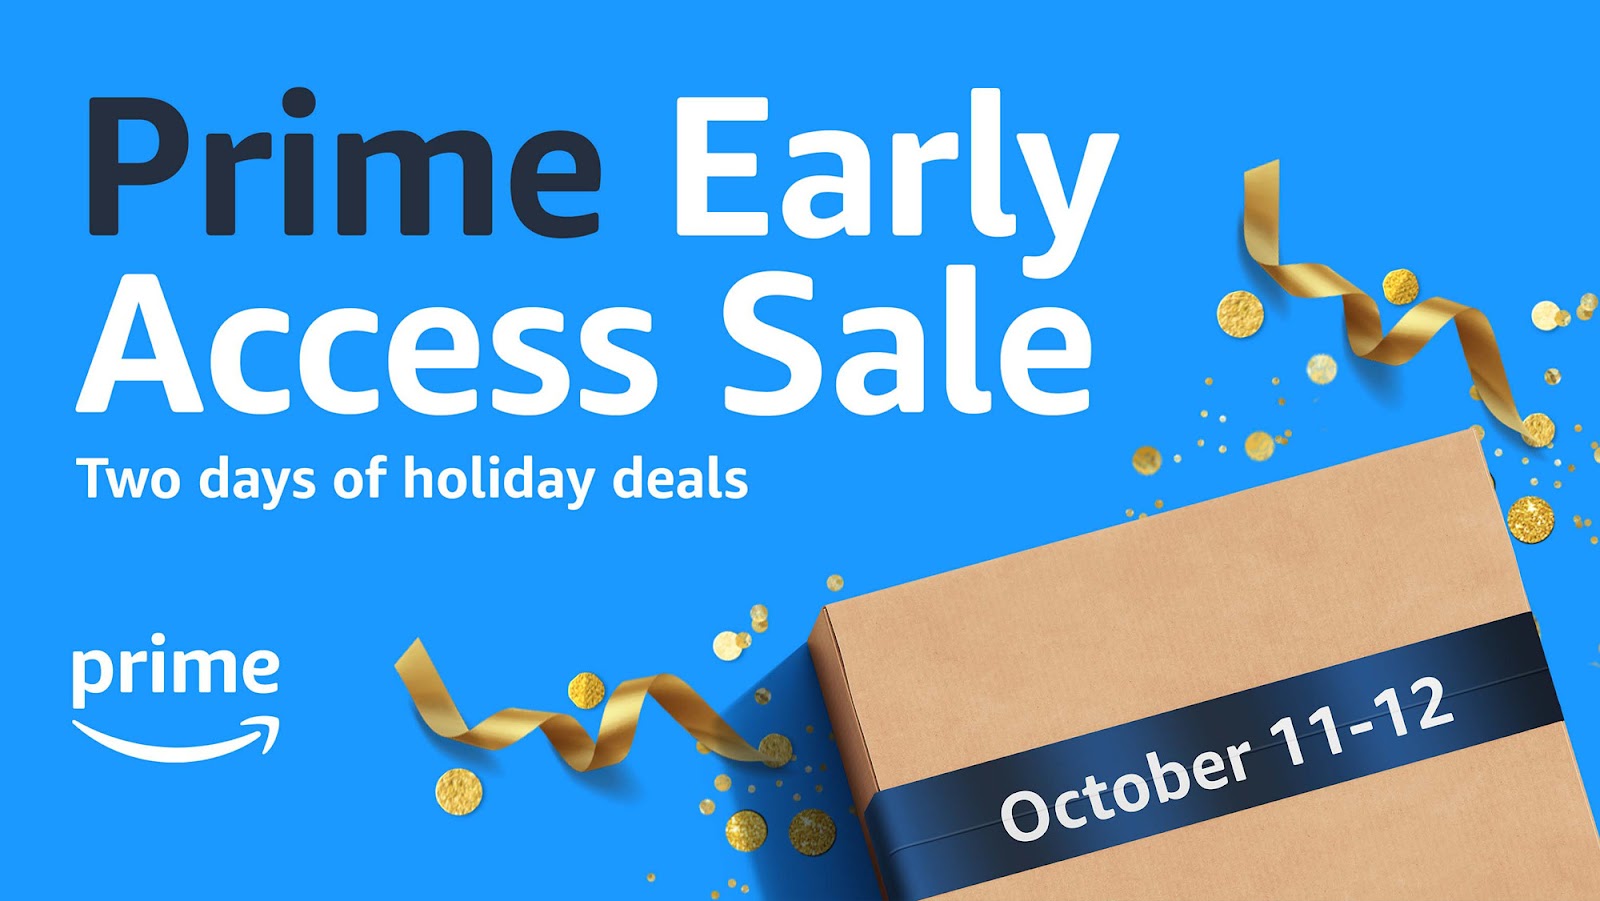 Amazon enables early access for its prime users during its sales